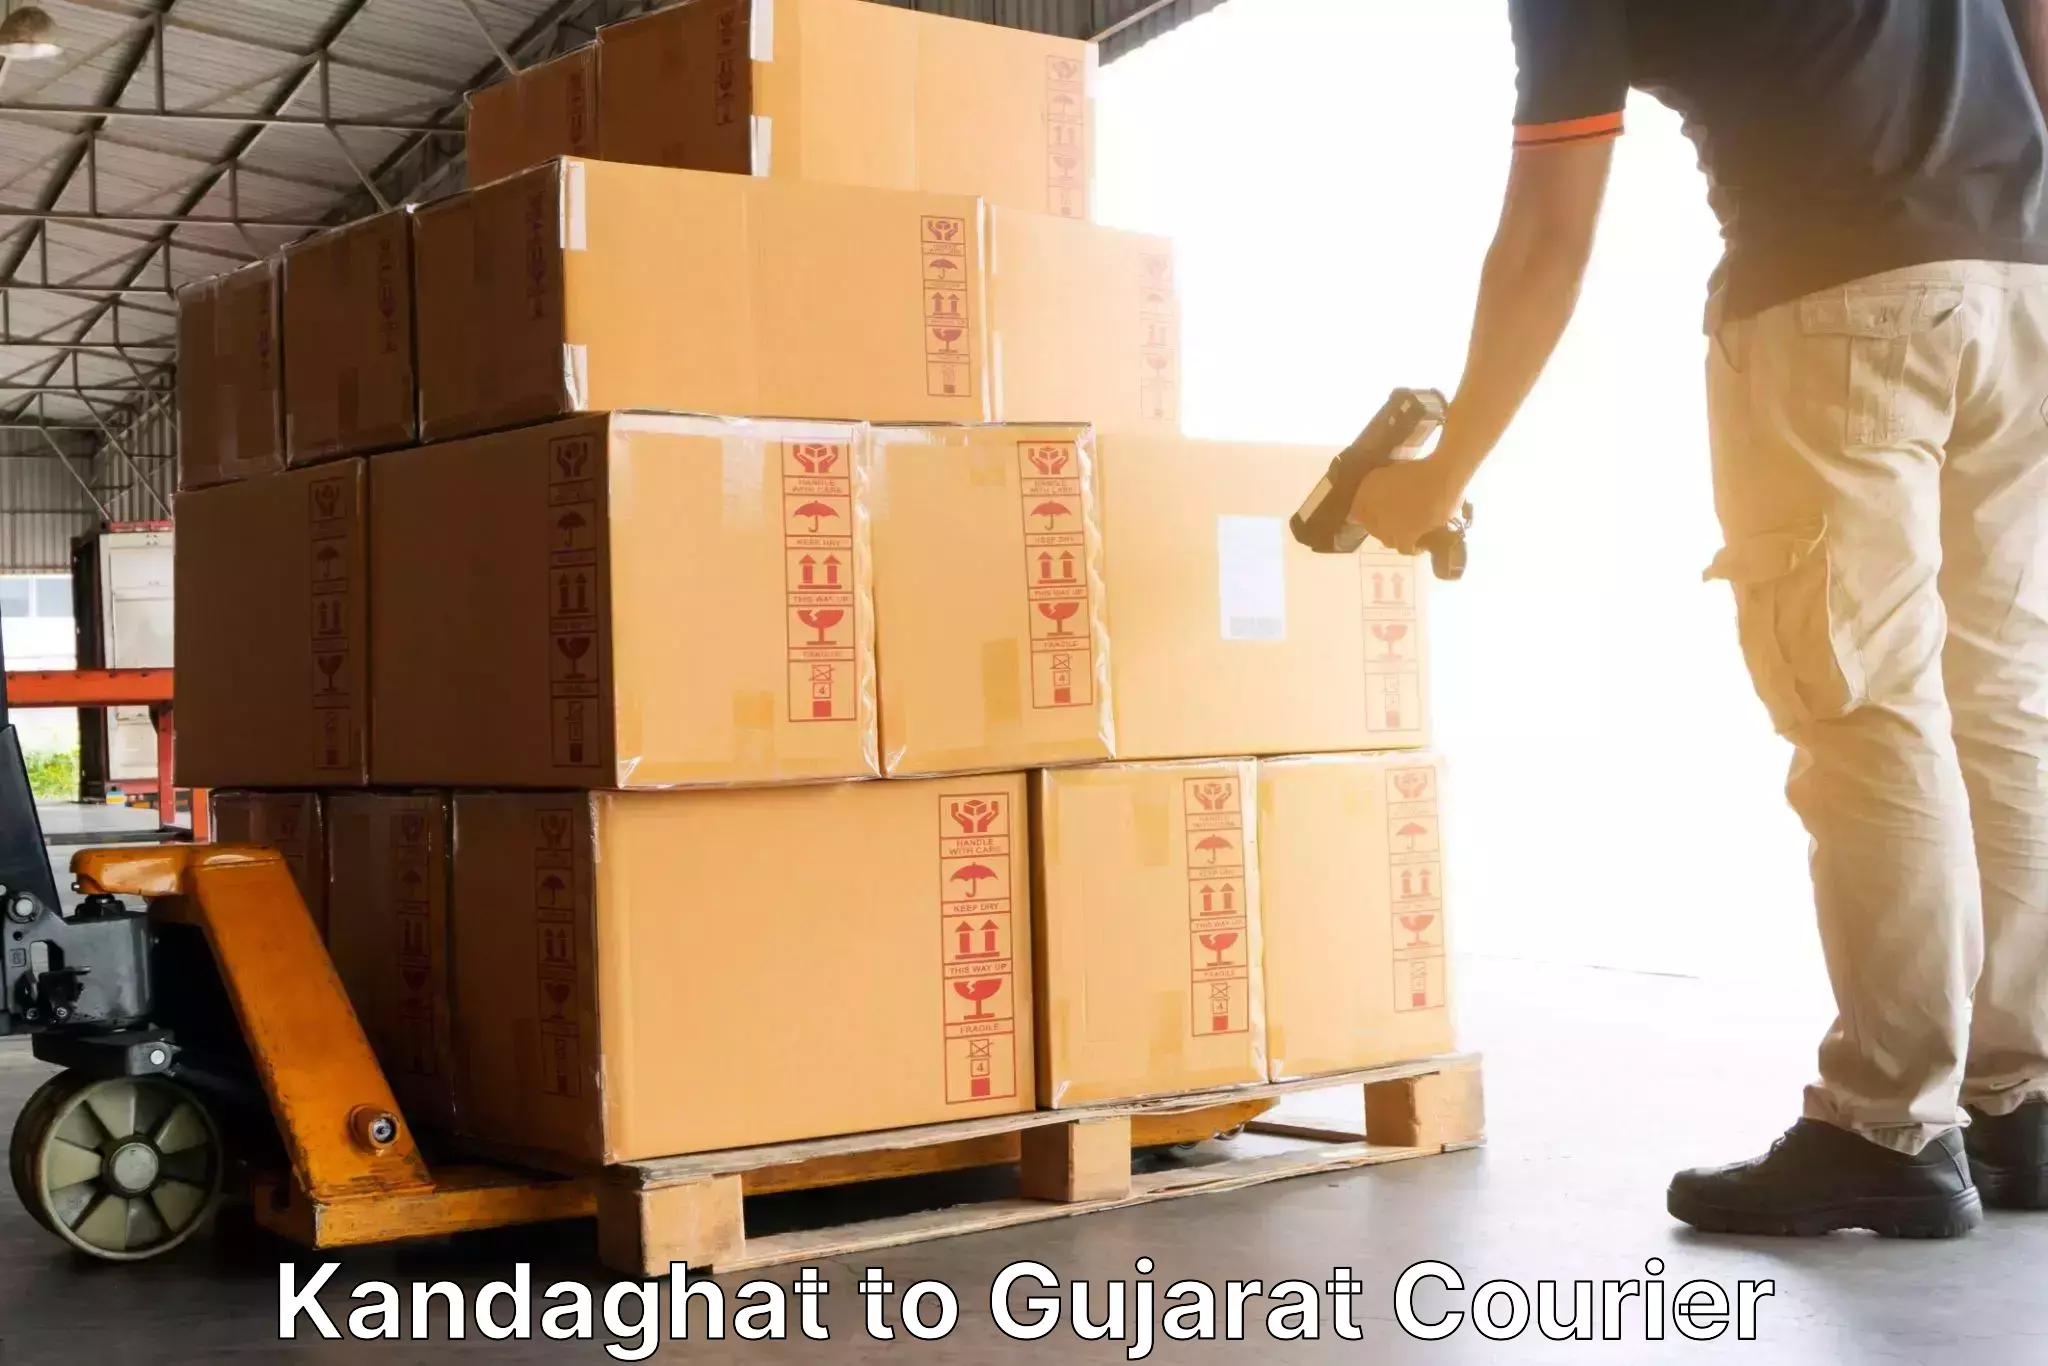 Courier service partnerships Kandaghat to Halol